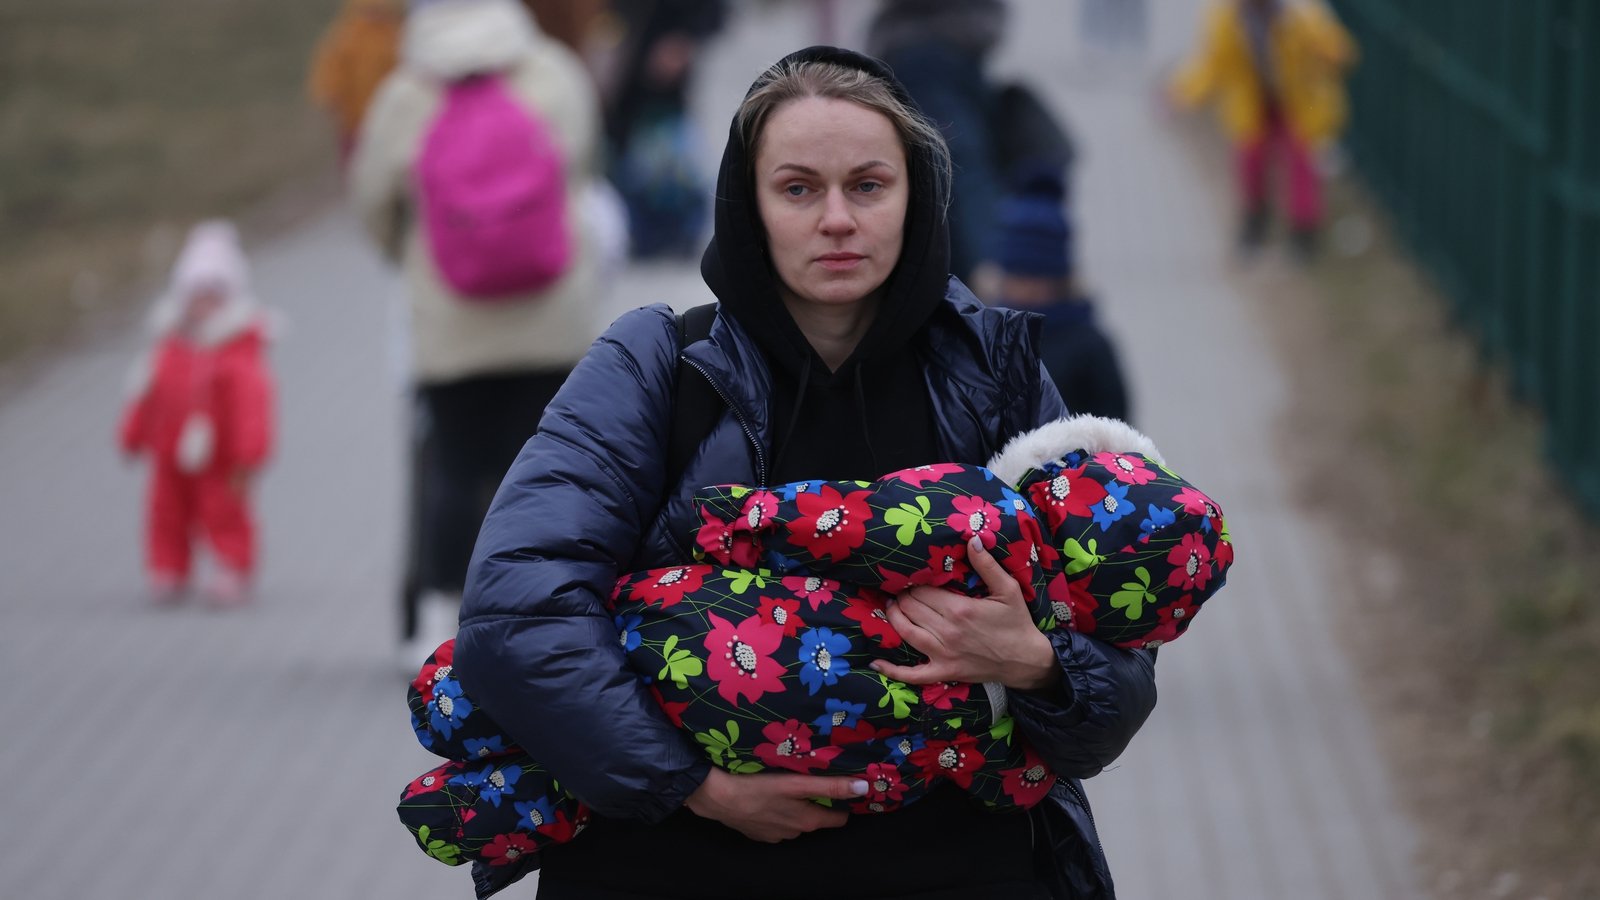 Image - A mother carrying an infant arrives in Poland at the Medyka border